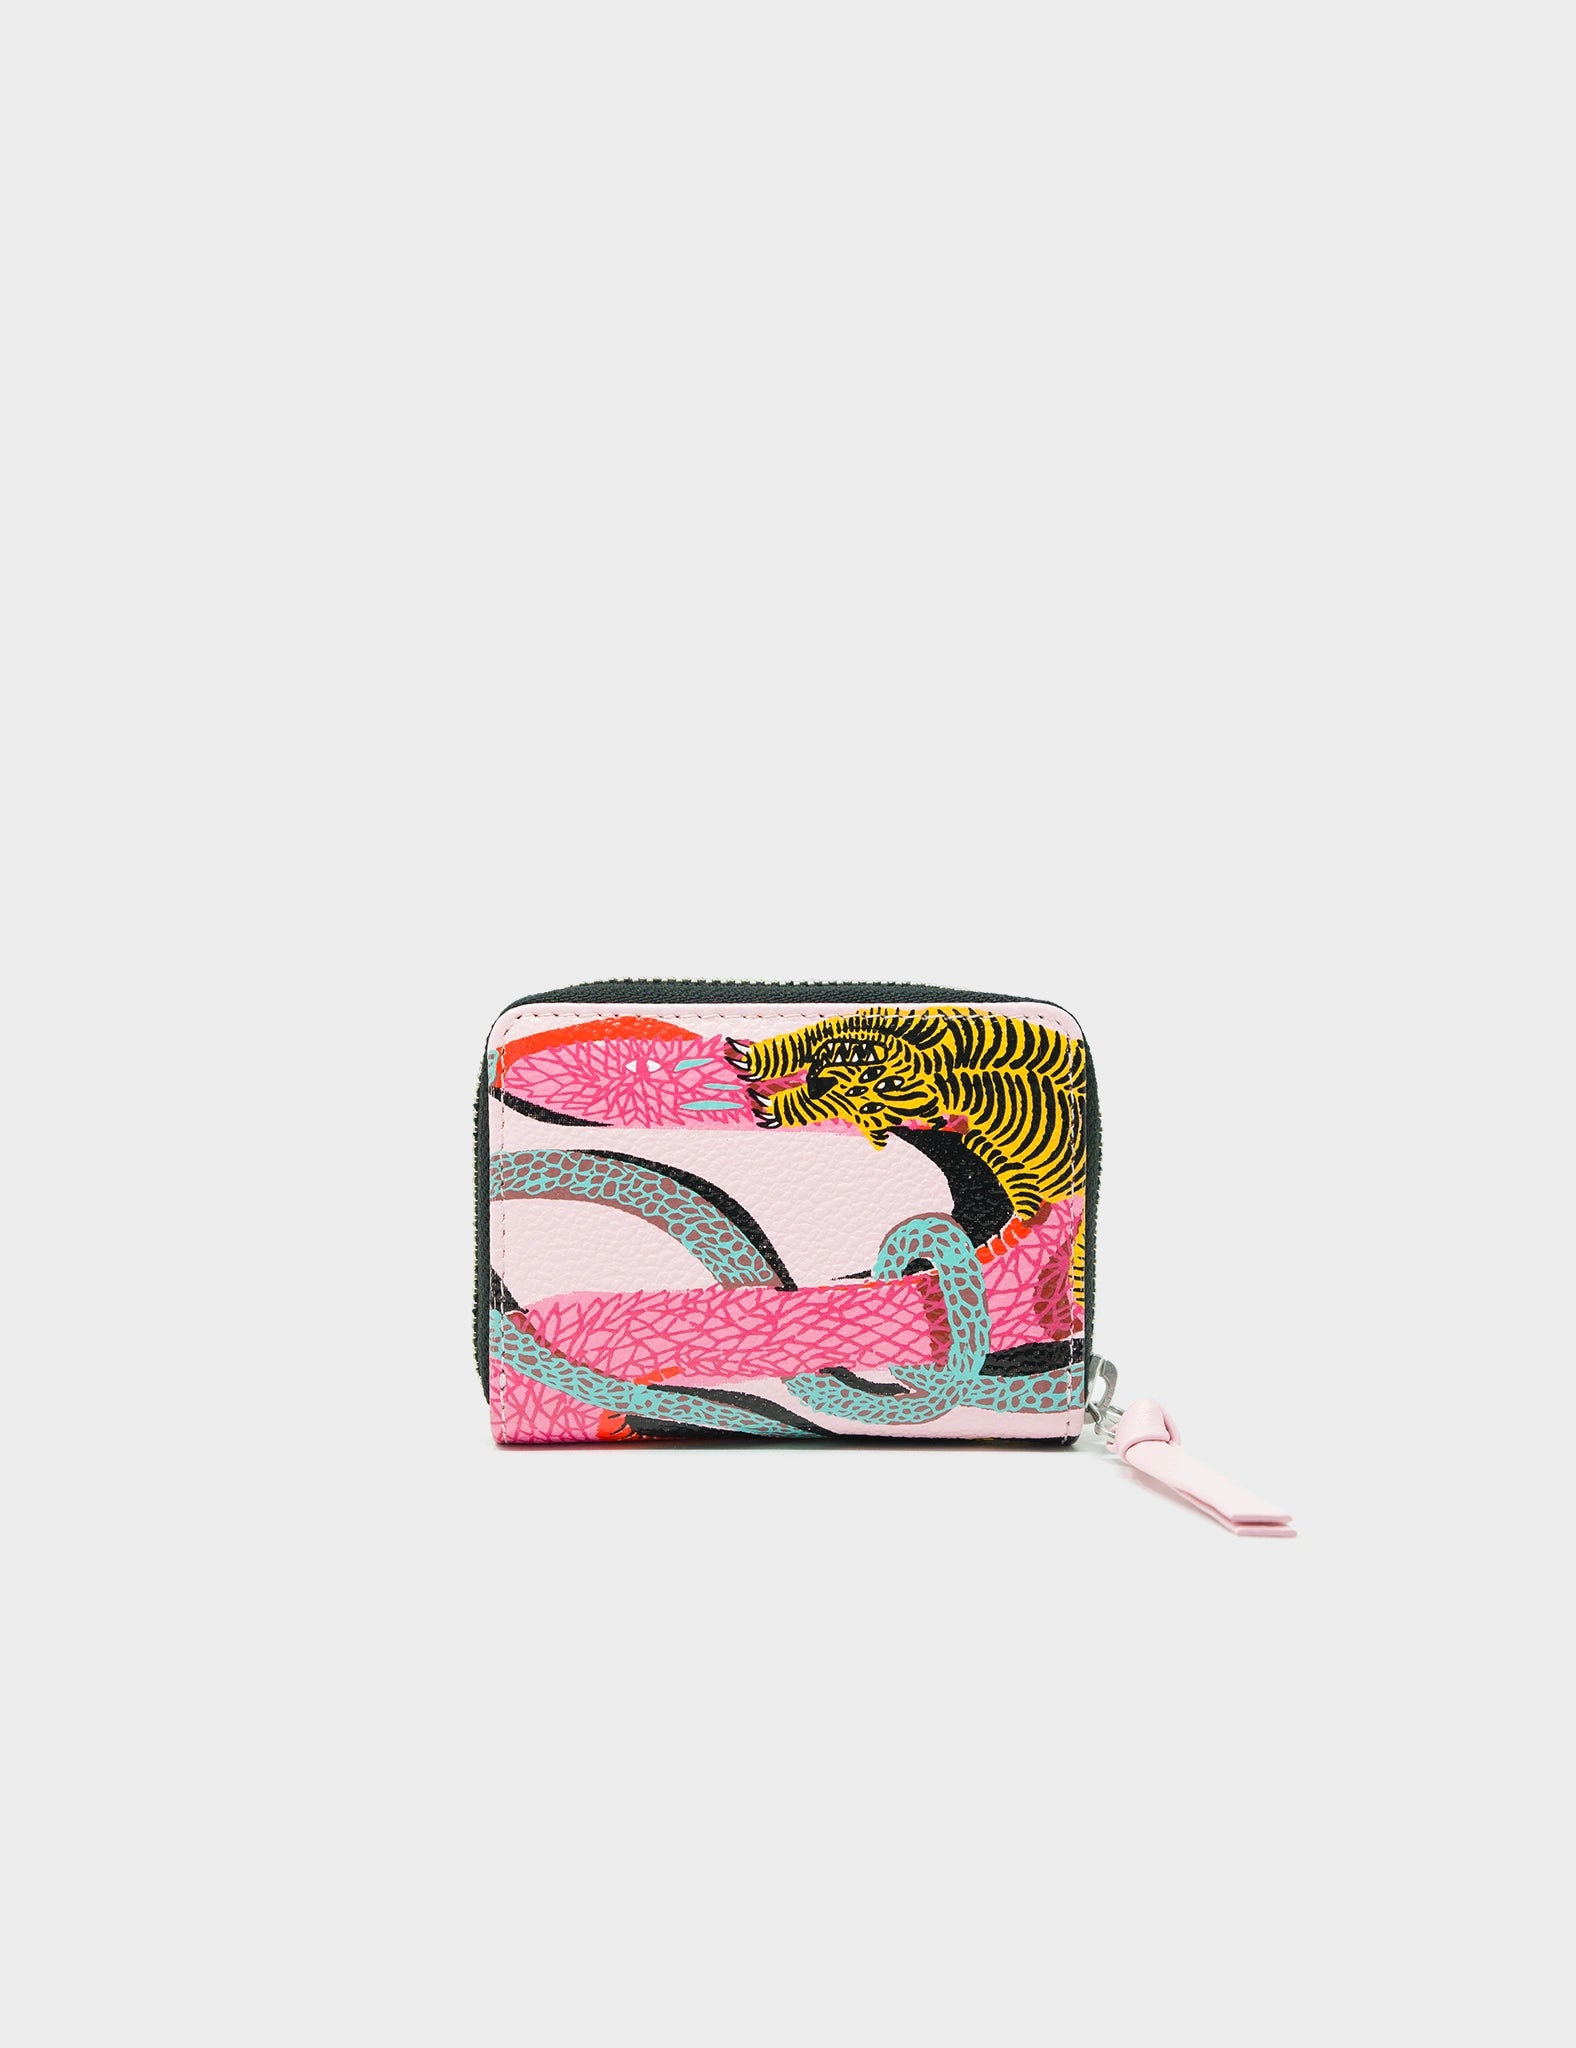 Frodo Parfait Pink Leather Zip Around Wallet - Tangle Rumble - Back 